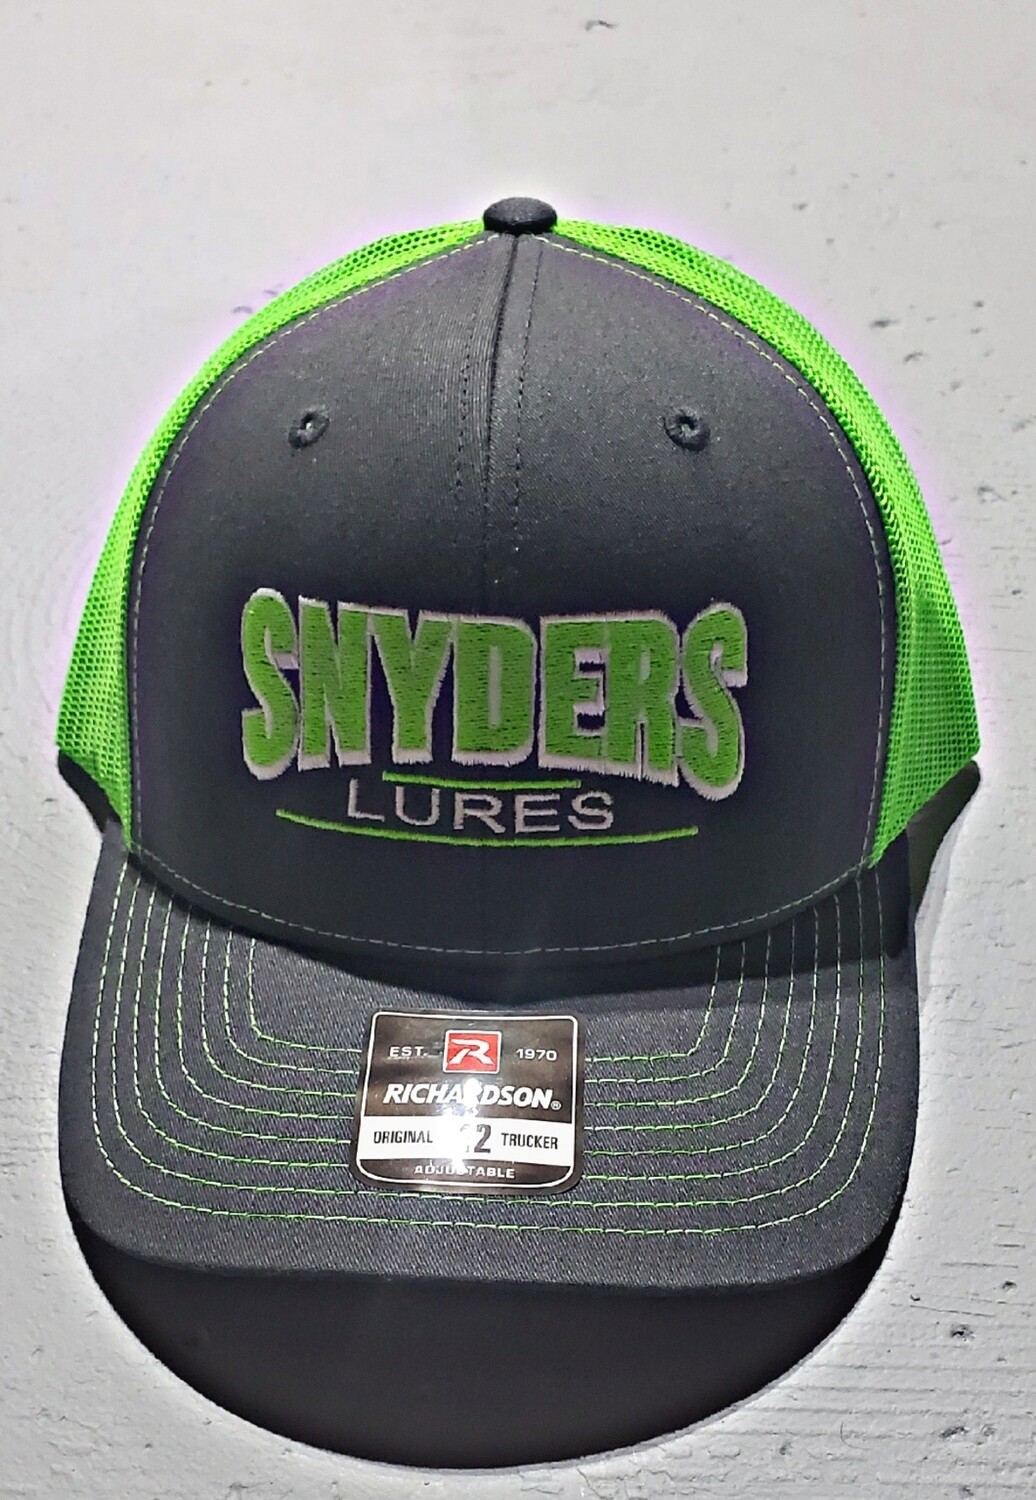 Snyders Lures Ball Cap